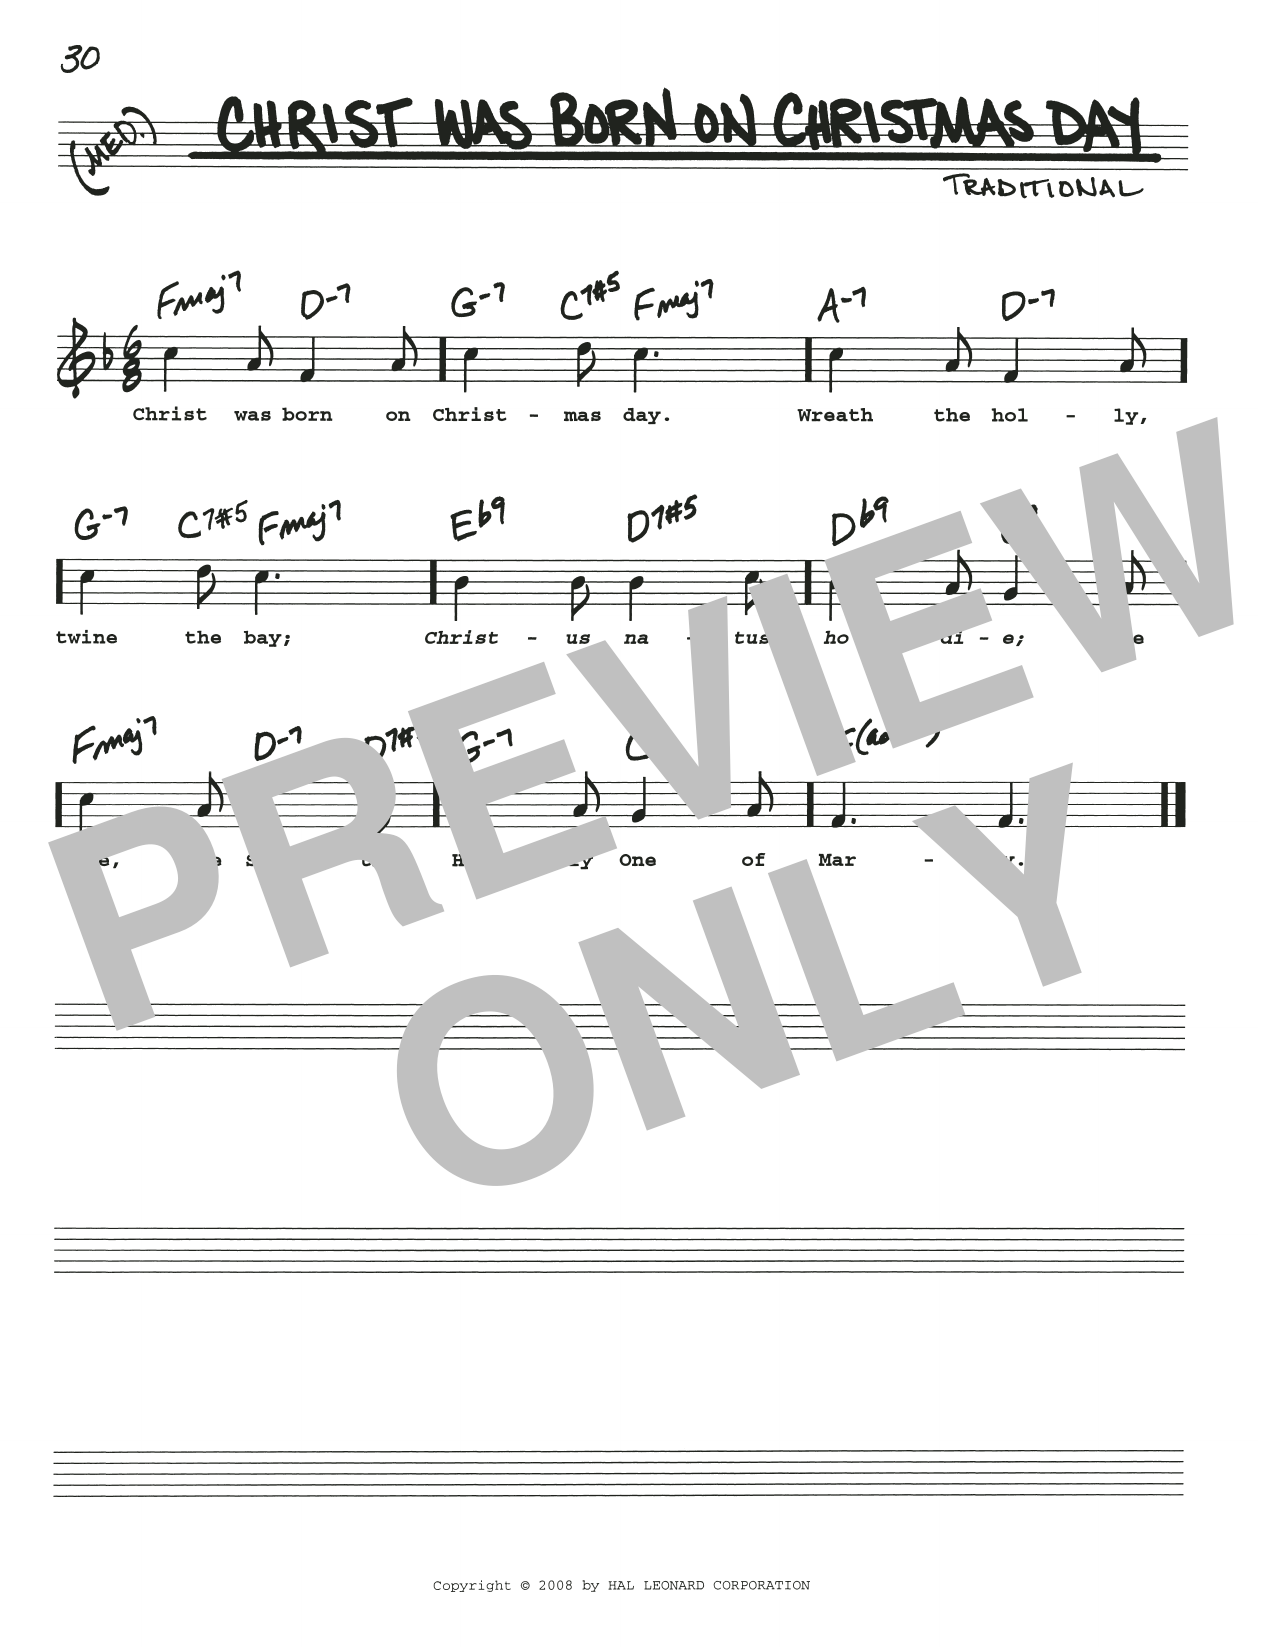 Download Traditional Christ Was Born On Christmas Day Sheet Music